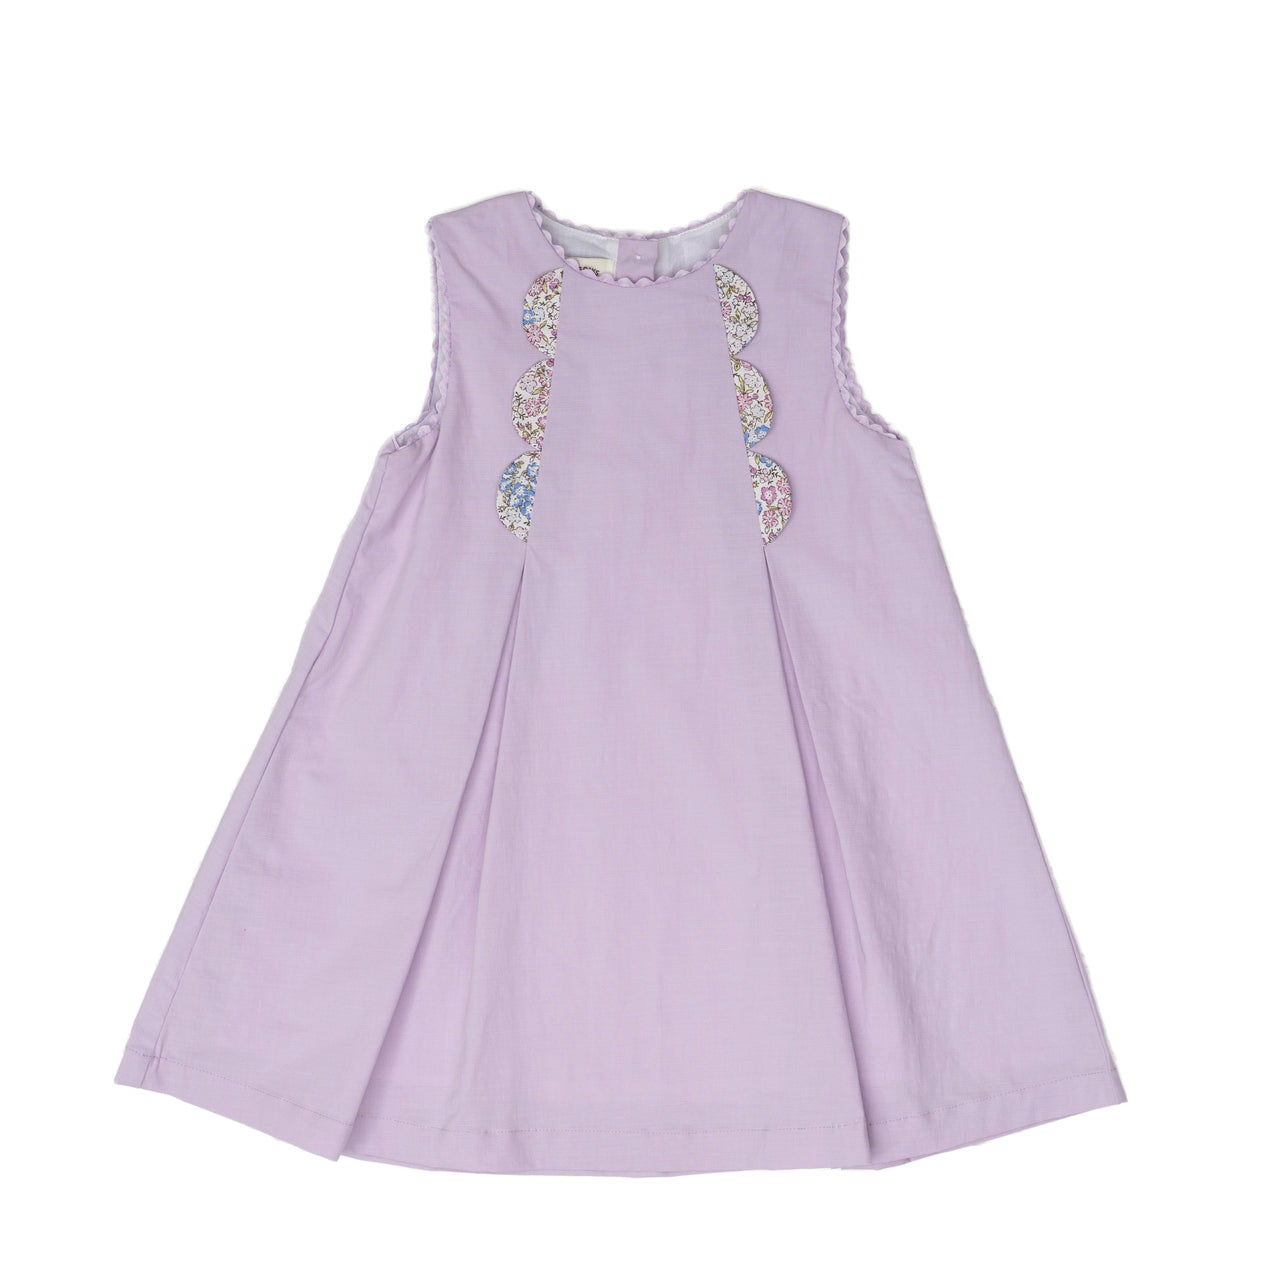 The Oaks Cassidy Dress Lilac Floral CL201 5102